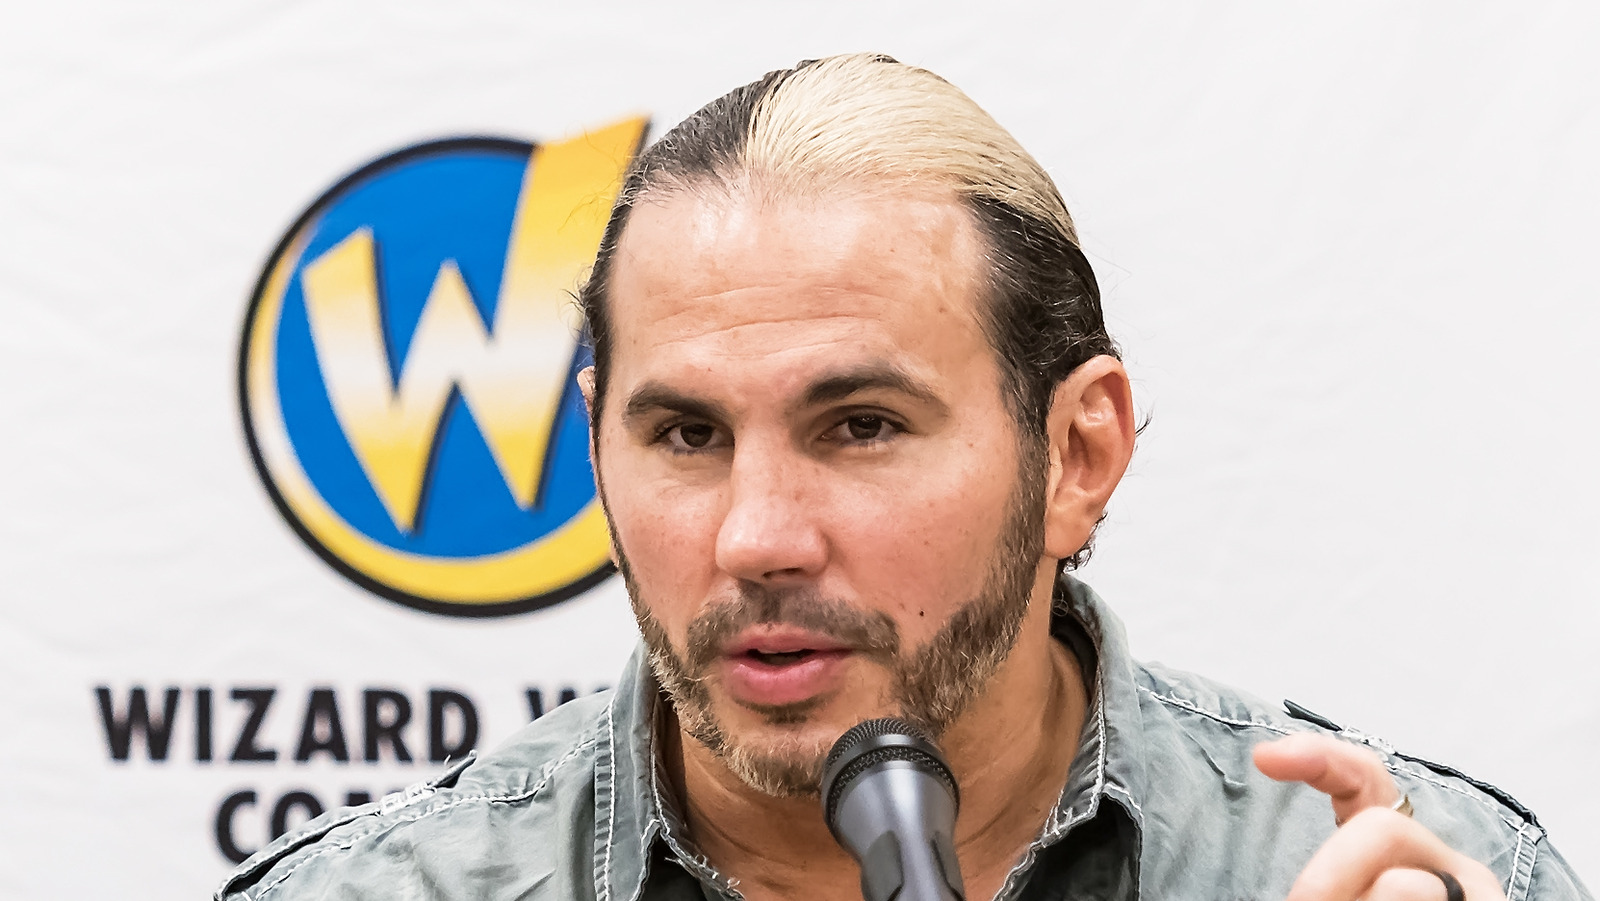 Video: AEW's Matt Hardy Shares Montage From Weekend Comic Con Appearance